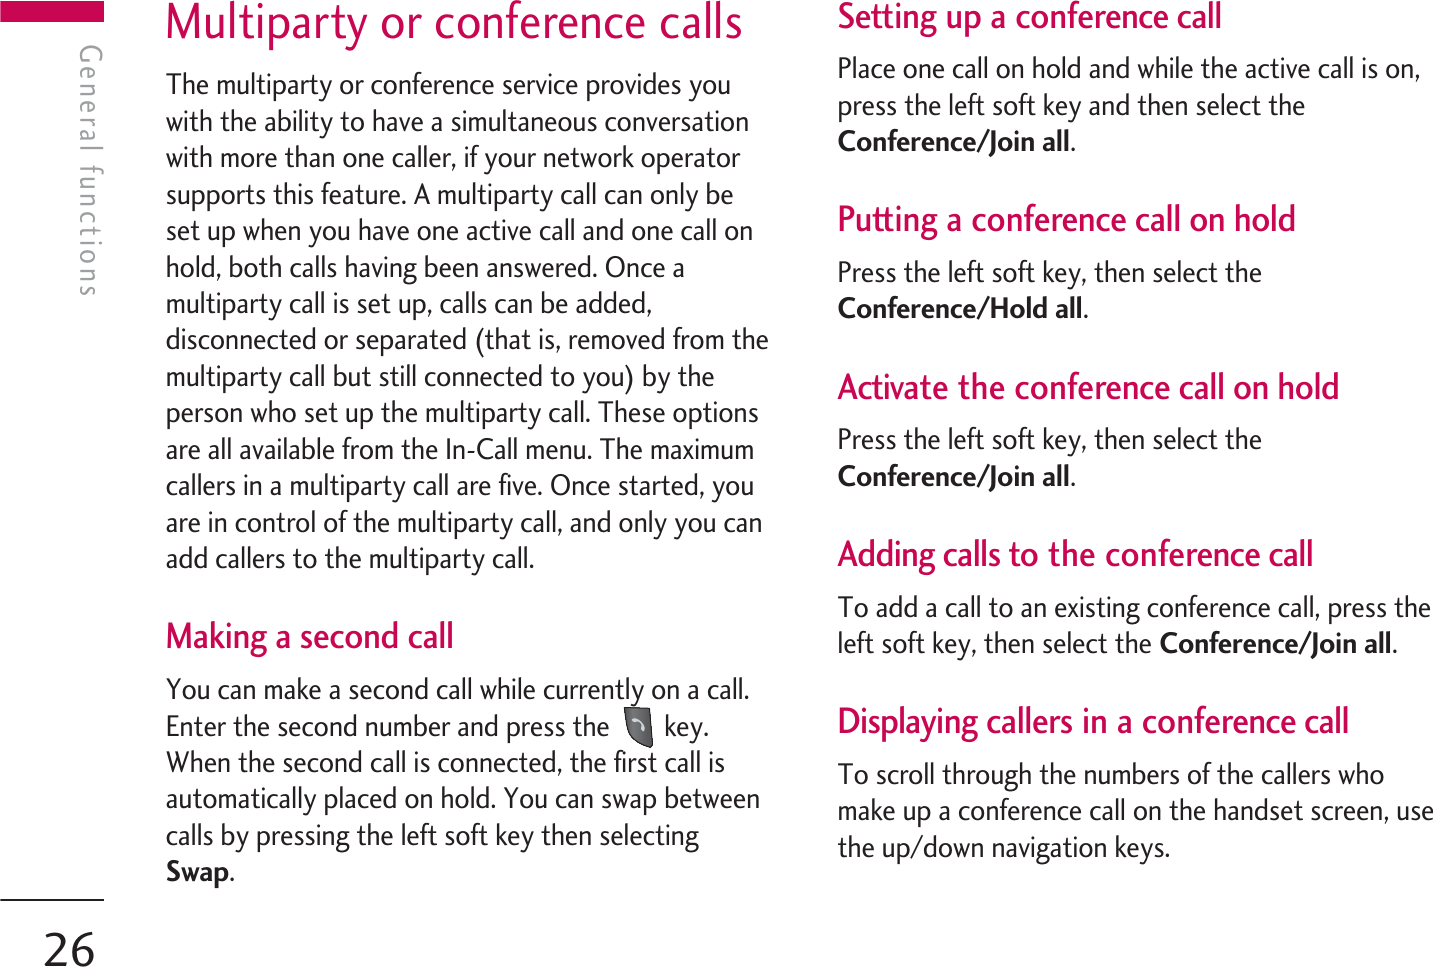 Multiparty or conference callsThe multiparty or conference service provides youwith the ability to have a simultaneous conversationwith more than one caller, if your network operatorsupports this feature. A multiparty call can only beset up when you have one active call and one call onhold, both calls having been answered. Once amultiparty call is set up, calls can be added,disconnected or separated (that is, removed from themultiparty call but still connected to you) by theperson who set up the multiparty call. These optionsare all available from the In-Call menu. The maximumcallers in a multiparty call are five. Once started, youare in control of the multiparty call, and only you canadd callers to the multiparty call.Making a second callYou can make a second call while currently on a call.Enter the second number and press the  key.When the second call is connected, the first call isautomatically placed on hold. You can swap betweencalls by pressing the left soft key then selectingSwap.Setting up a conference callPlace one call on hold and while the active call is on,press the left soft key and then select theConference/Join all.Putting a conference call on holdPress the left soft key, then select theConference/Hold all.Activate the conference call on holdPress the left soft key, then select theConference/Join all.Adding calls to the conference callTo add a call to an existing conference call, press theleft soft key, then select the Conference/Join all.Displaying callers in a conference callTo scroll through the numbers of the callers whomake up a conference call on the handset screen, usethe up/down navigation keys.General functionsGeneral functions26